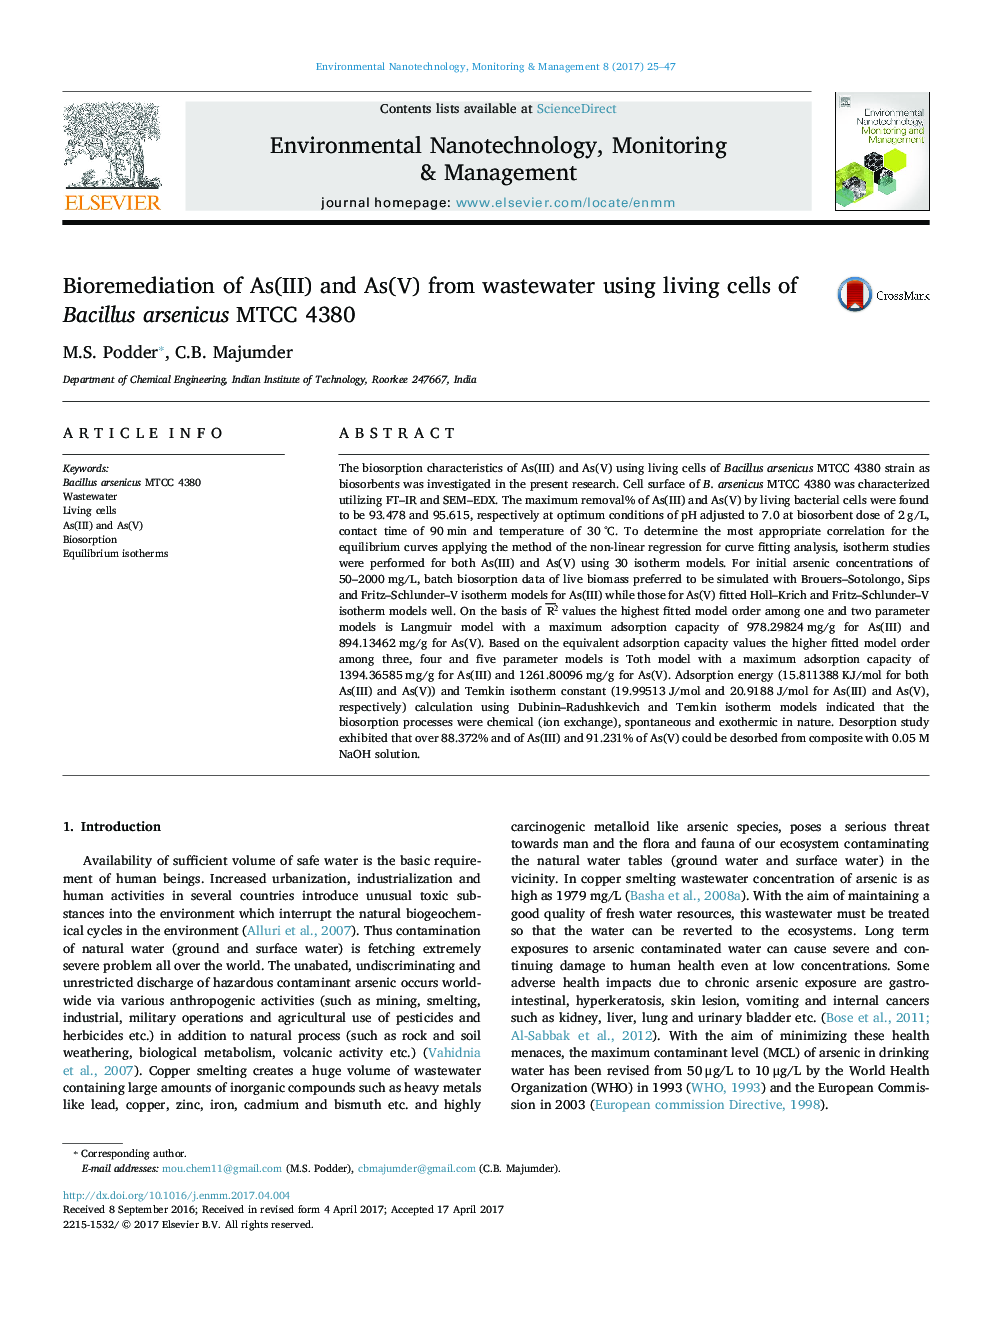 Bioremediation of As(III) and As(V) from wastewater using living cells of Bacillus arsenicus MTCC 4380